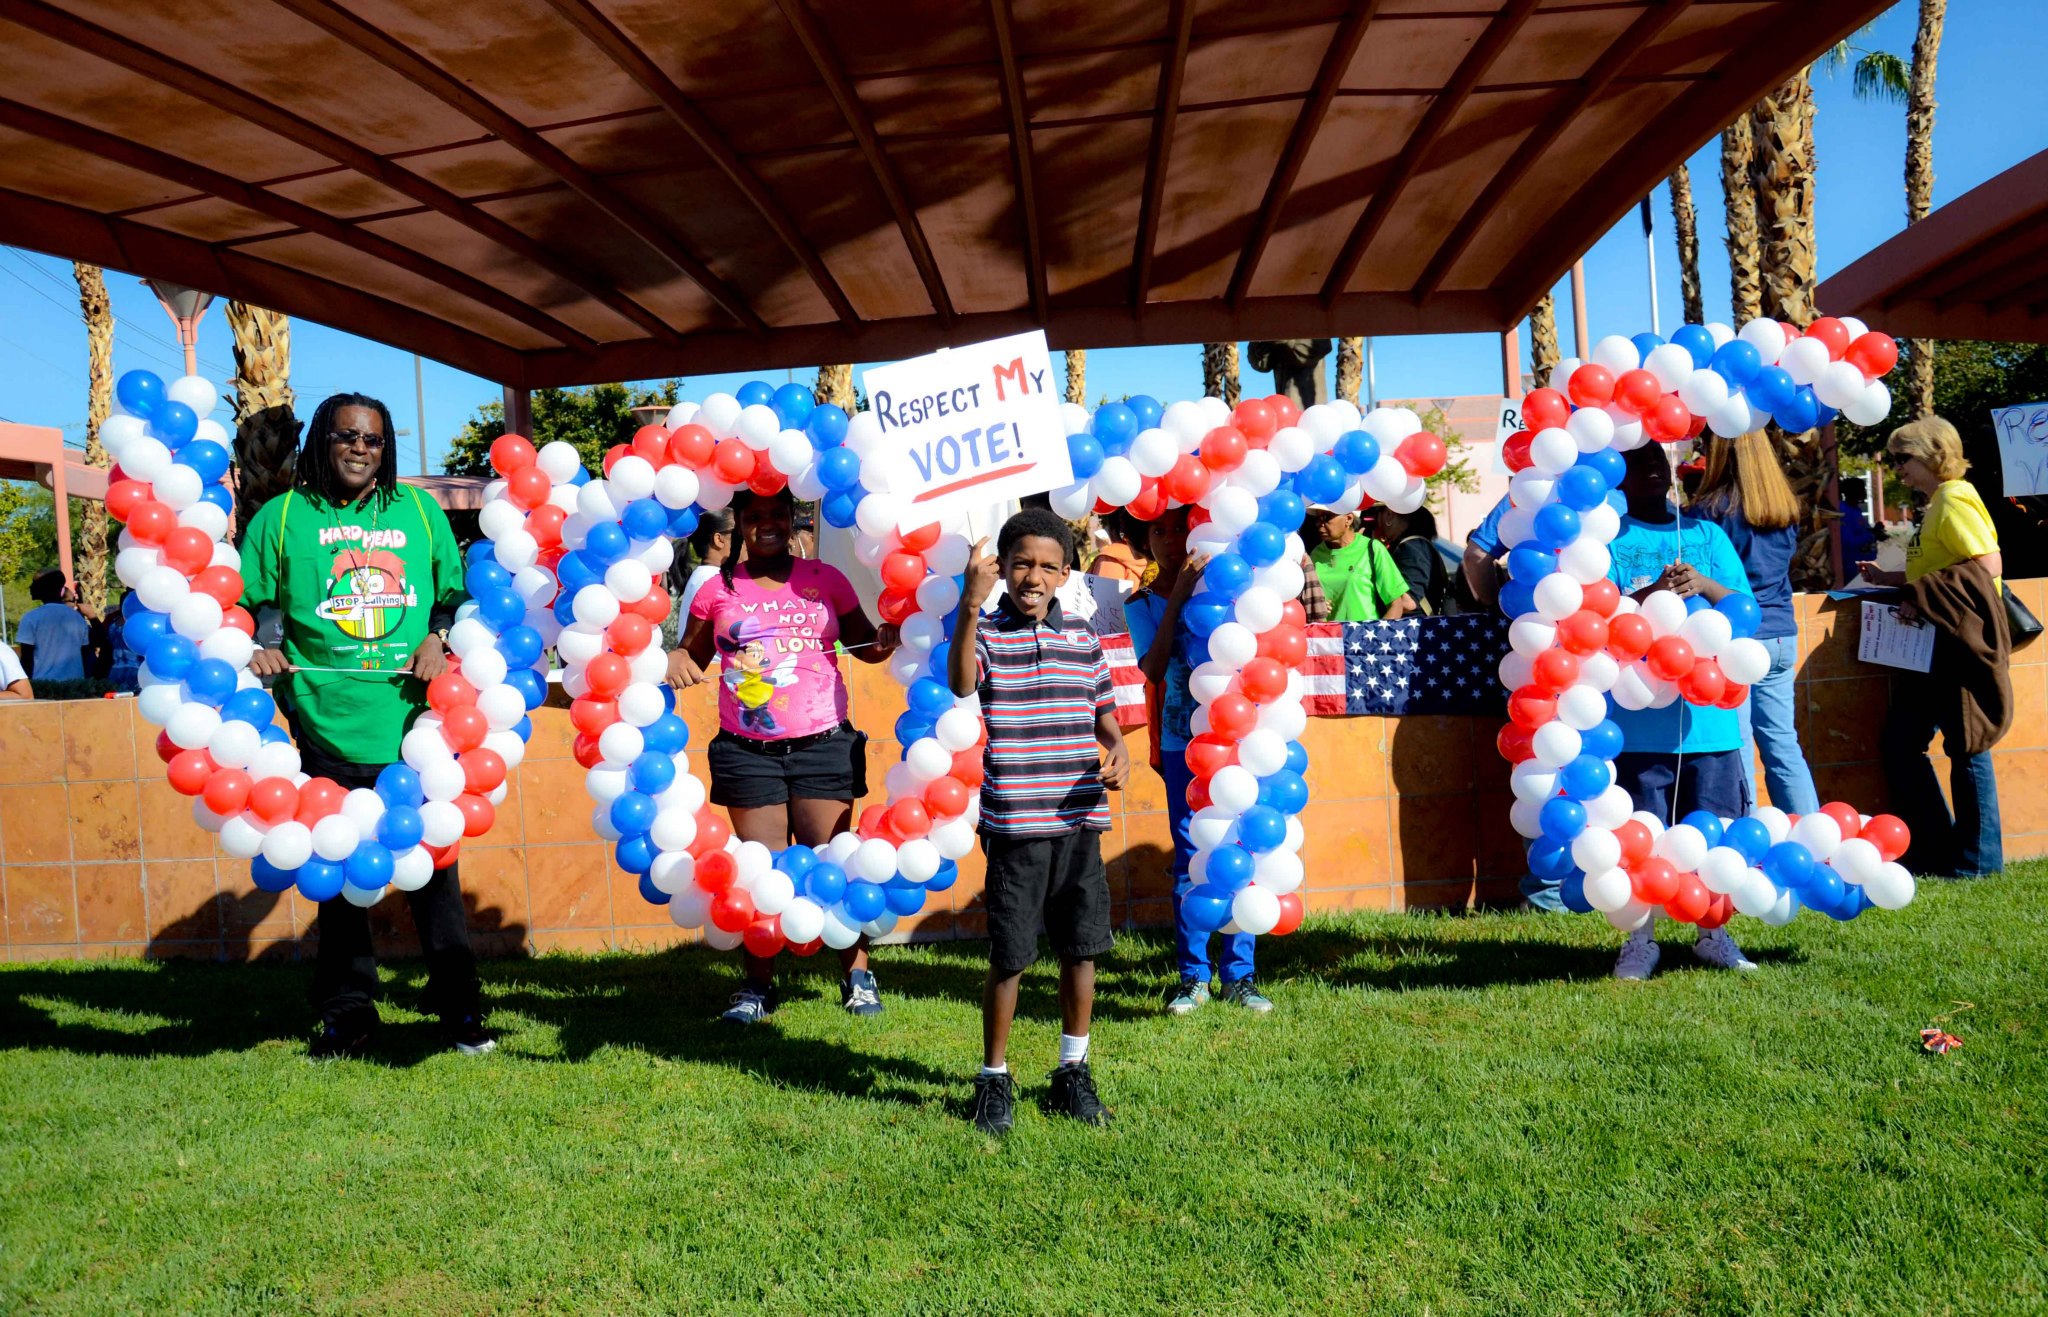 Giant balloons in the shape of "VOTE" and a child holding a sign that says "Respect my Vote"